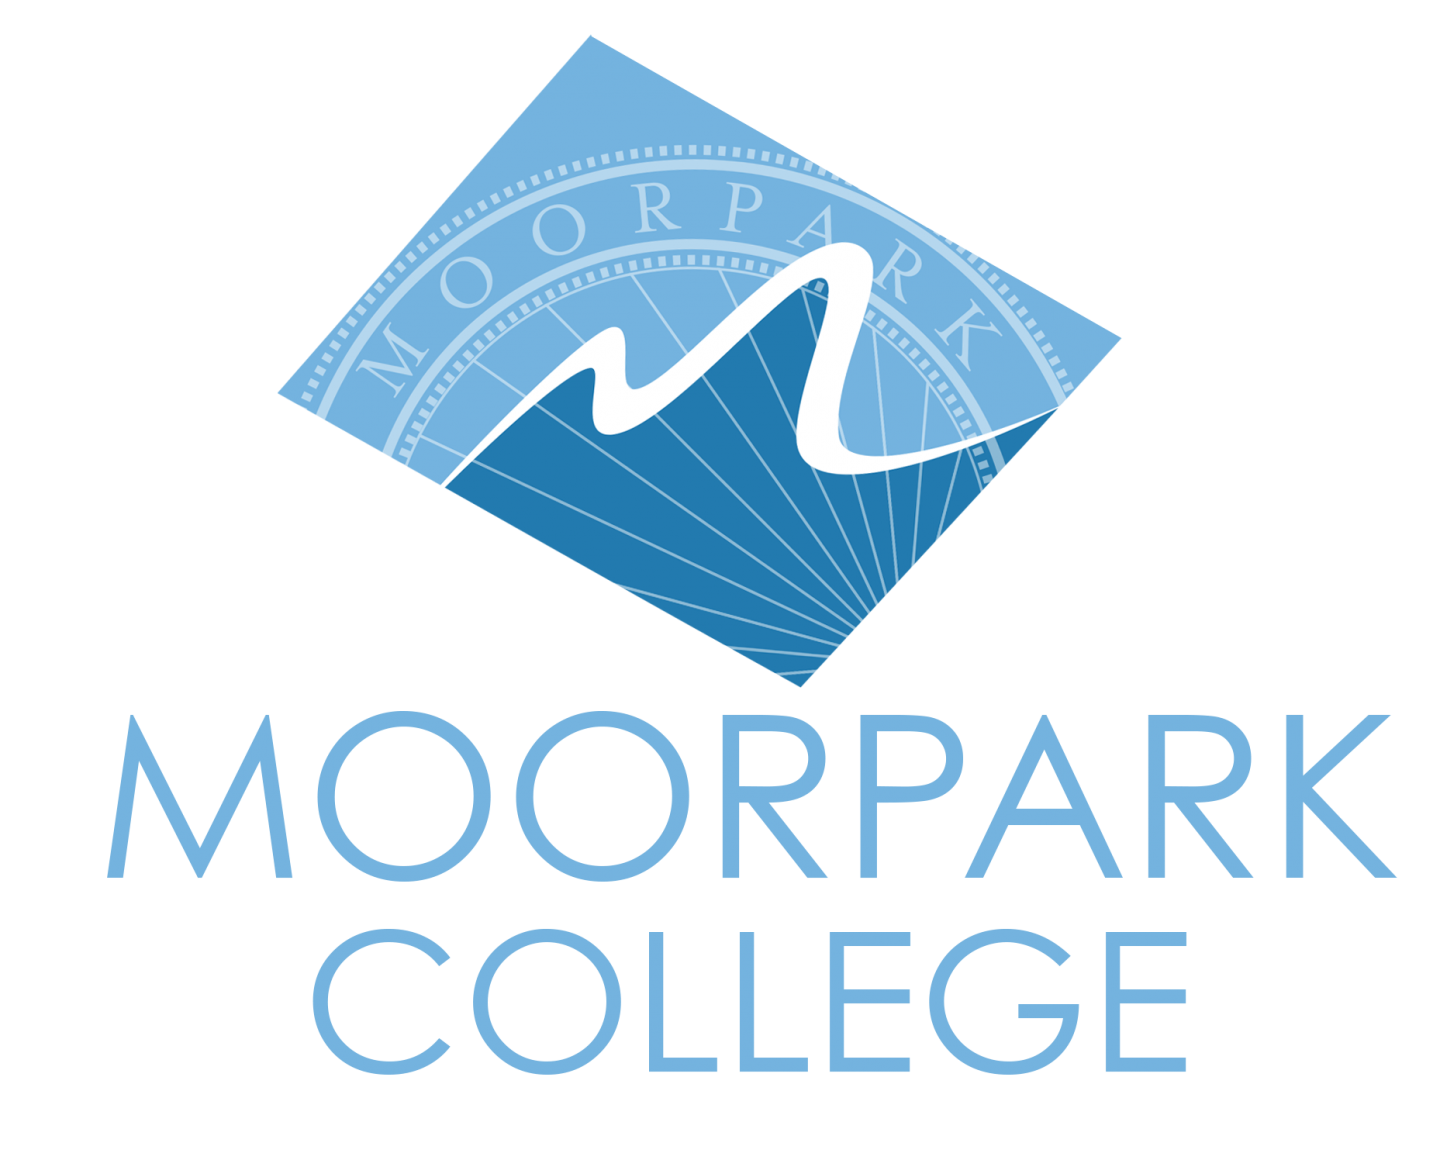 Moorpark College Stacked logo in blues